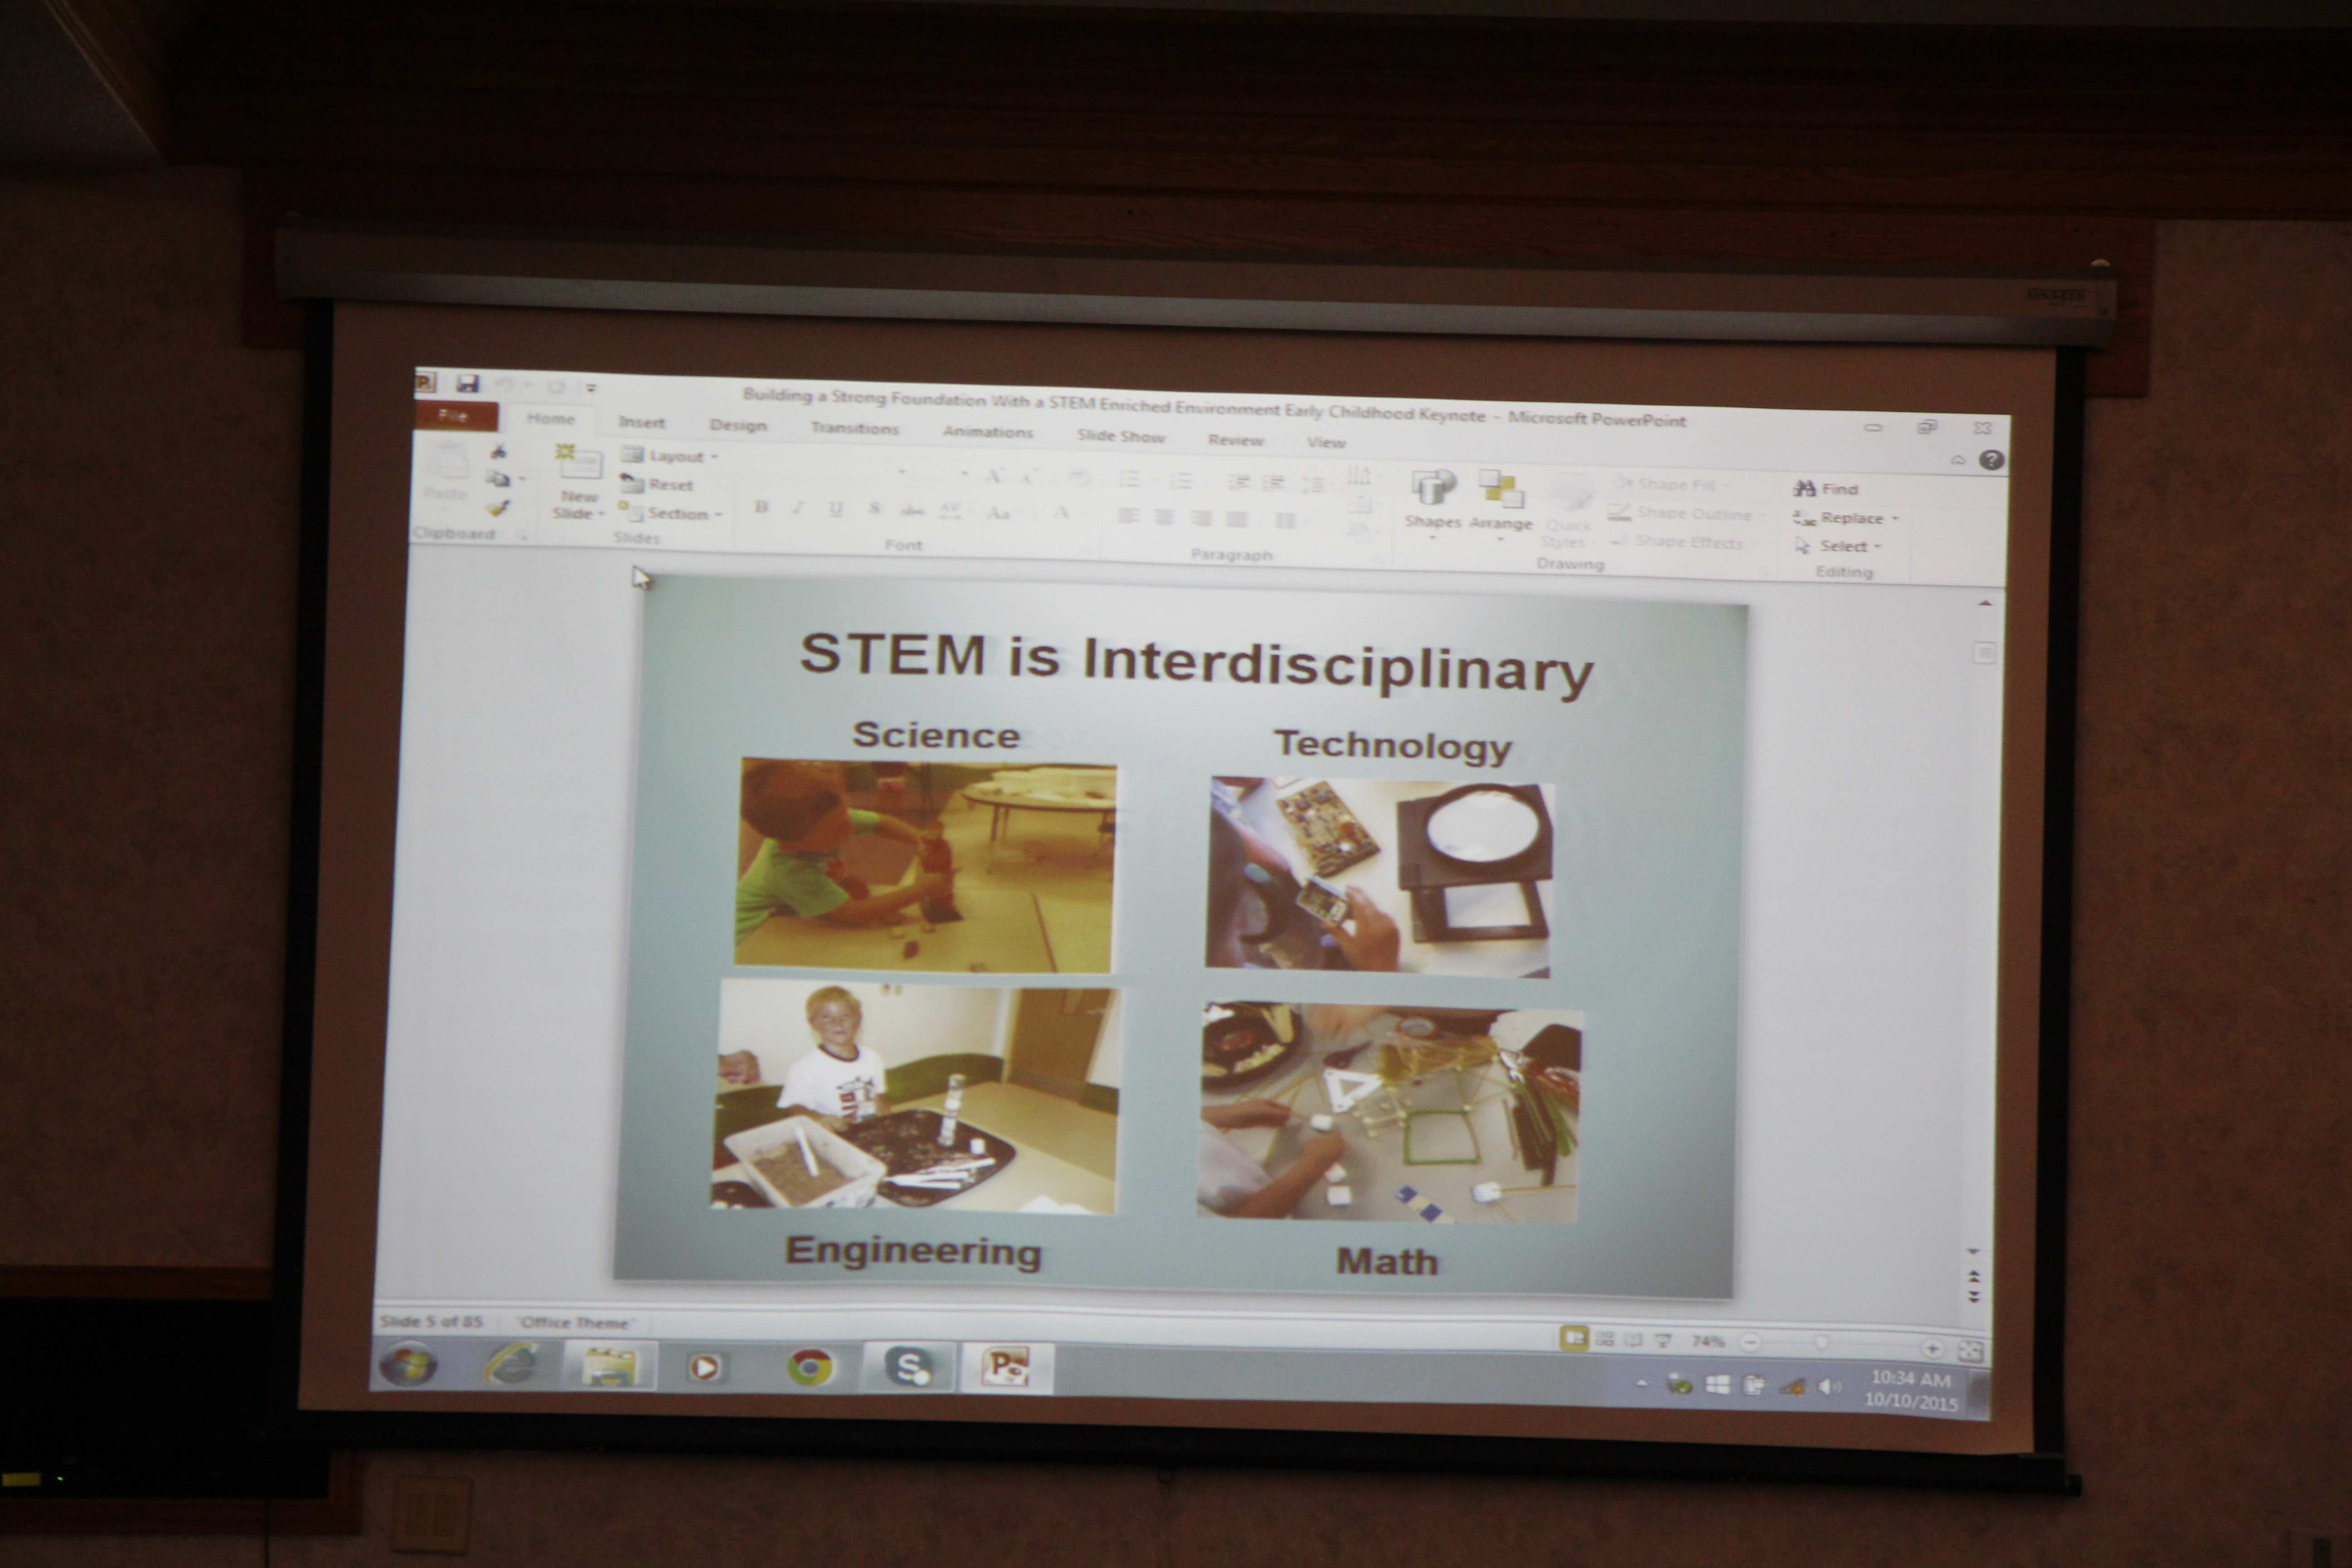 STEM and Science interactive keynotes by Dr. Diana Wehrell-Grabowski